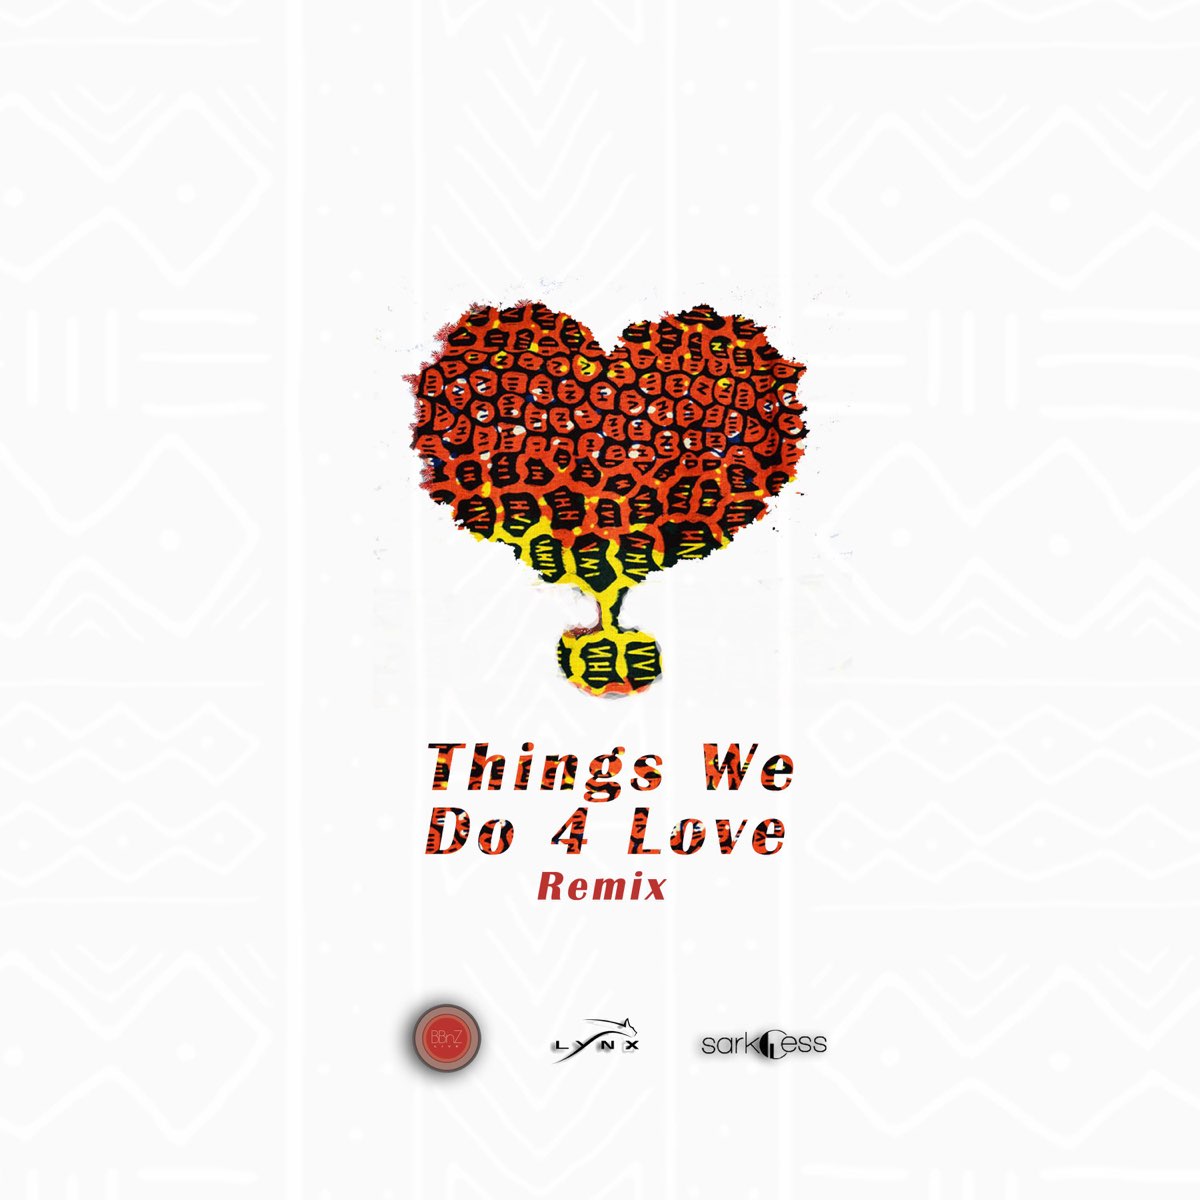 Love Remix. Jazzamor / things we do for Love обложка. Love things. The Sounds things we do for Love.